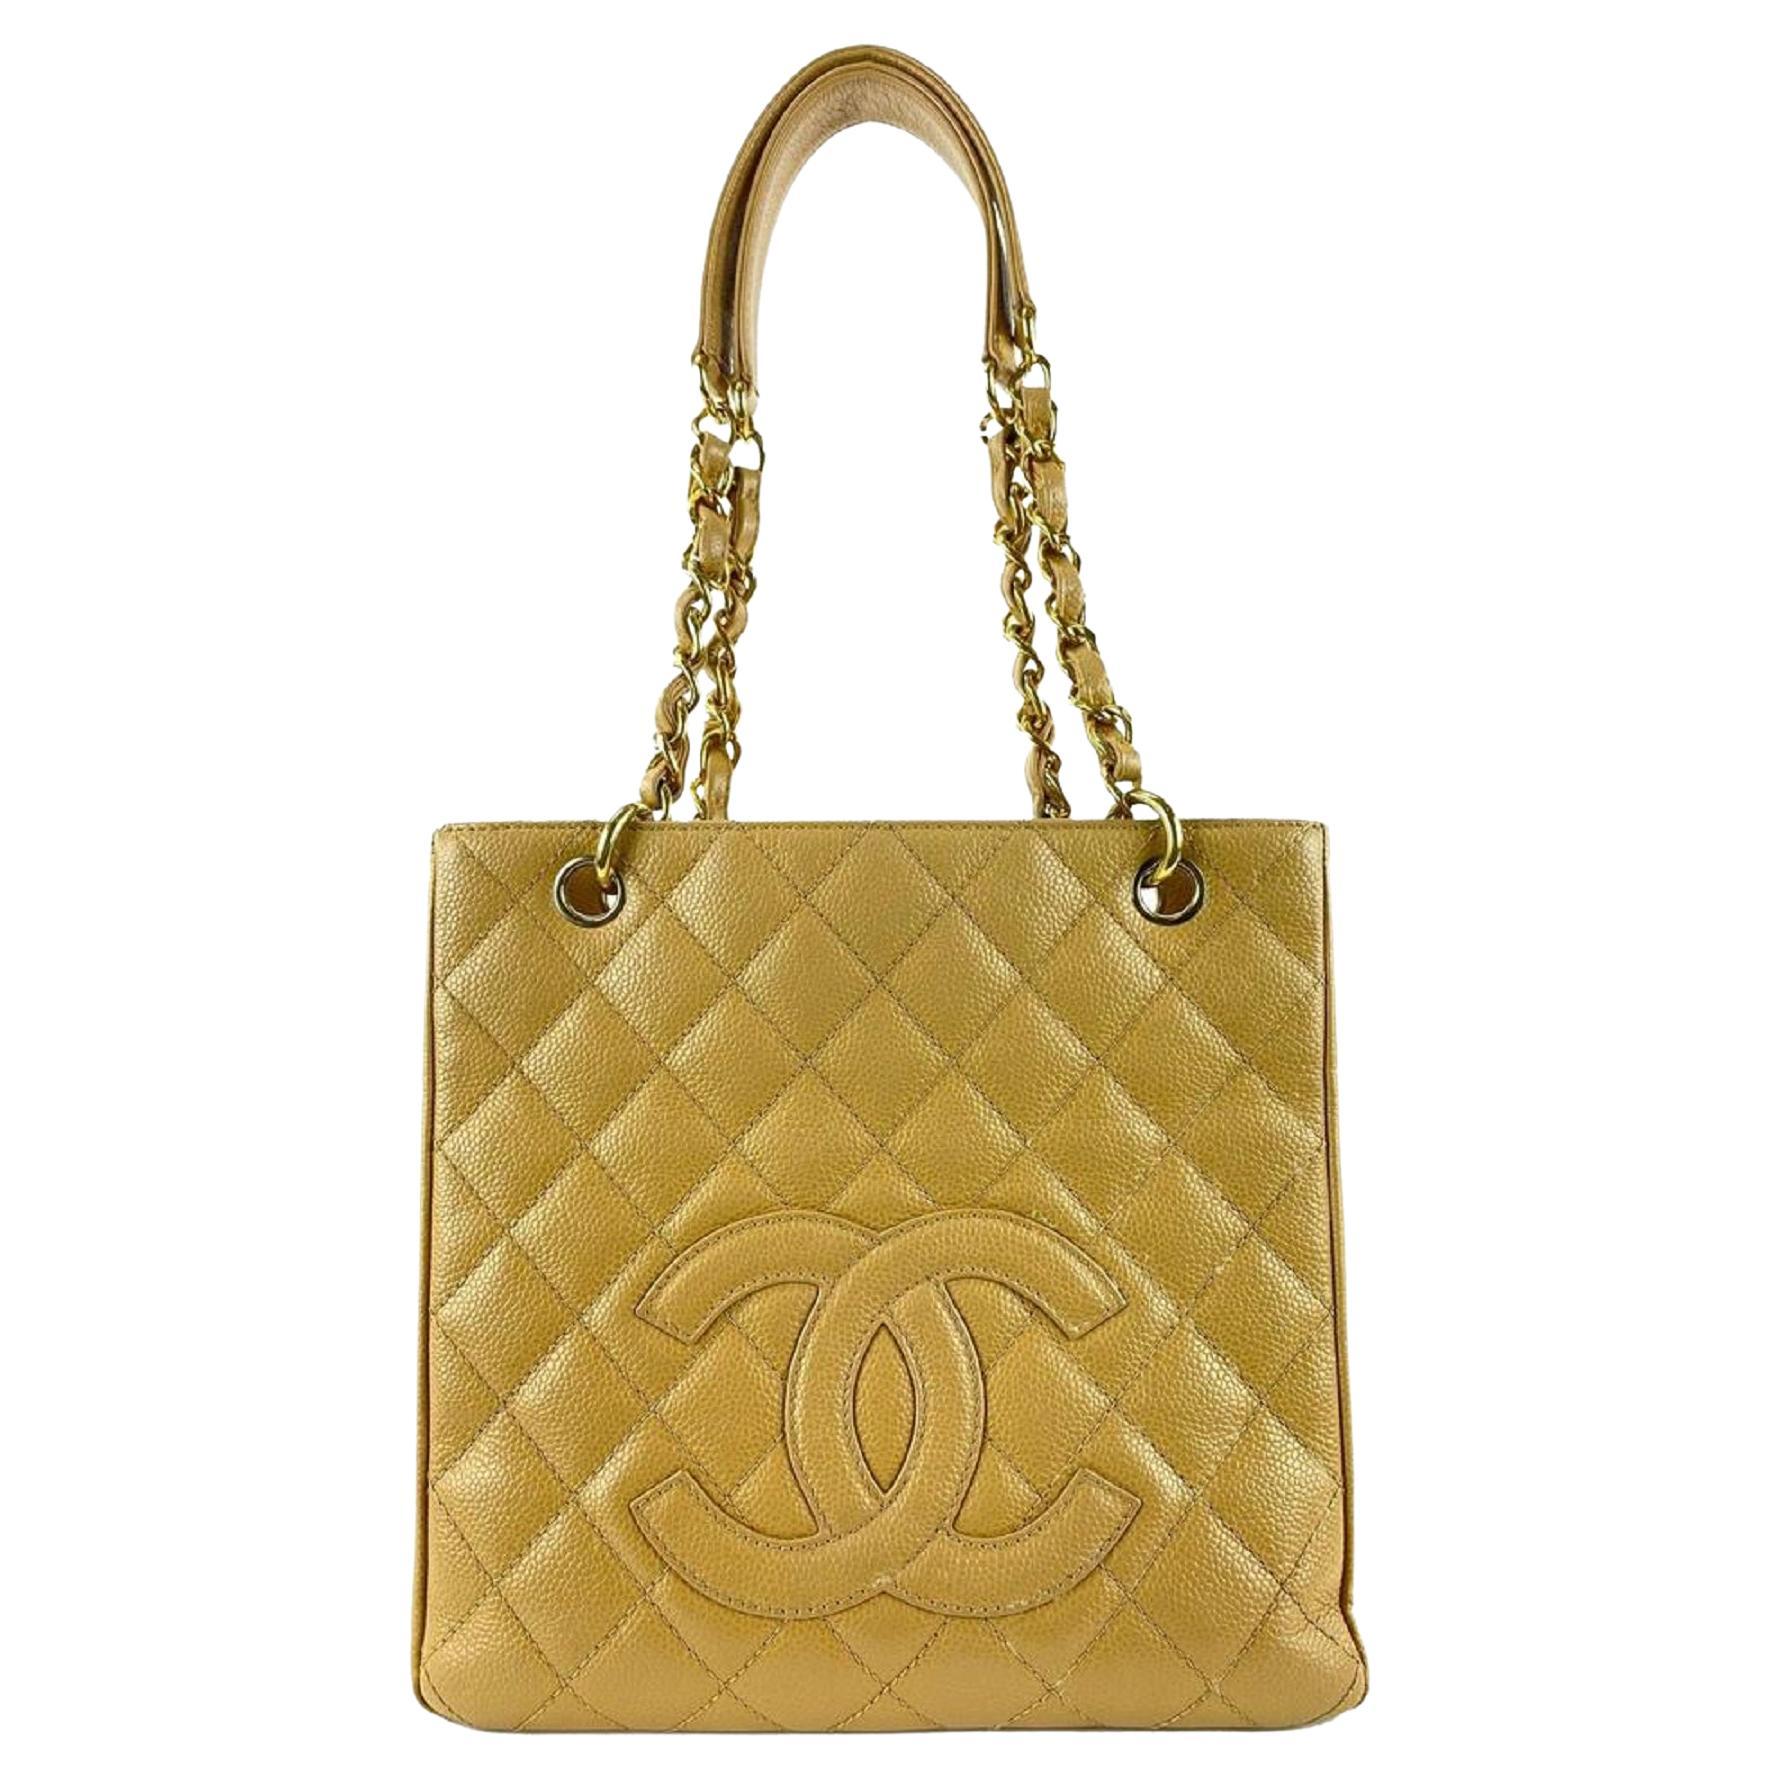 Chanel Dark Beige Quilted Caviar Leather PST Petite Shopping Tote Gold 1120c3